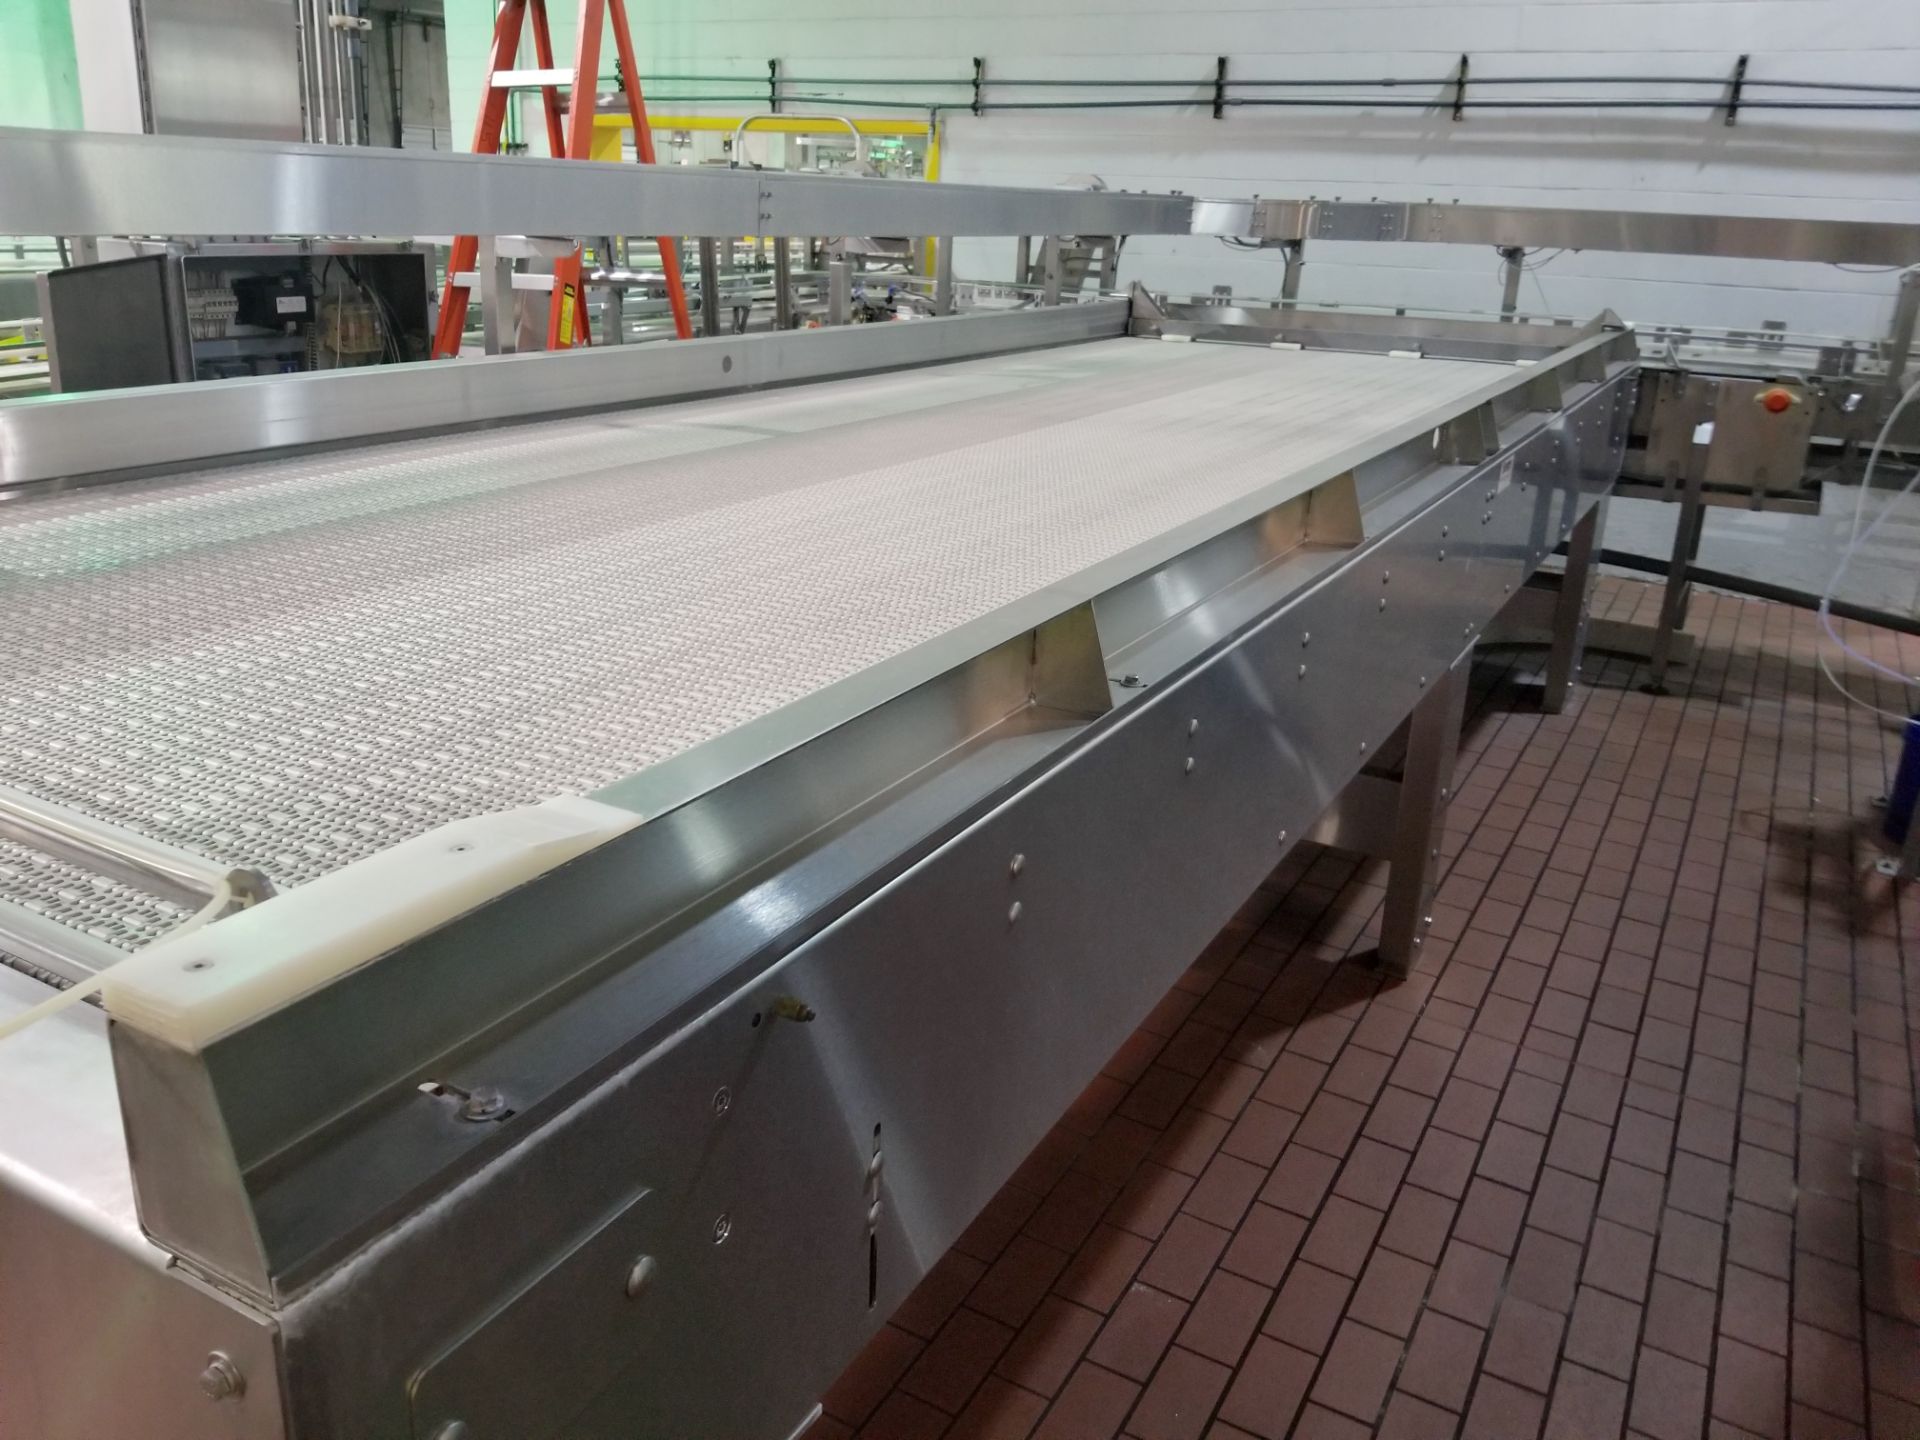 2007 Sentry Bi-Directional 6 x 20 Accumulation Table, Includes 11 feet of Infeed Conveyor - Image 3 of 11